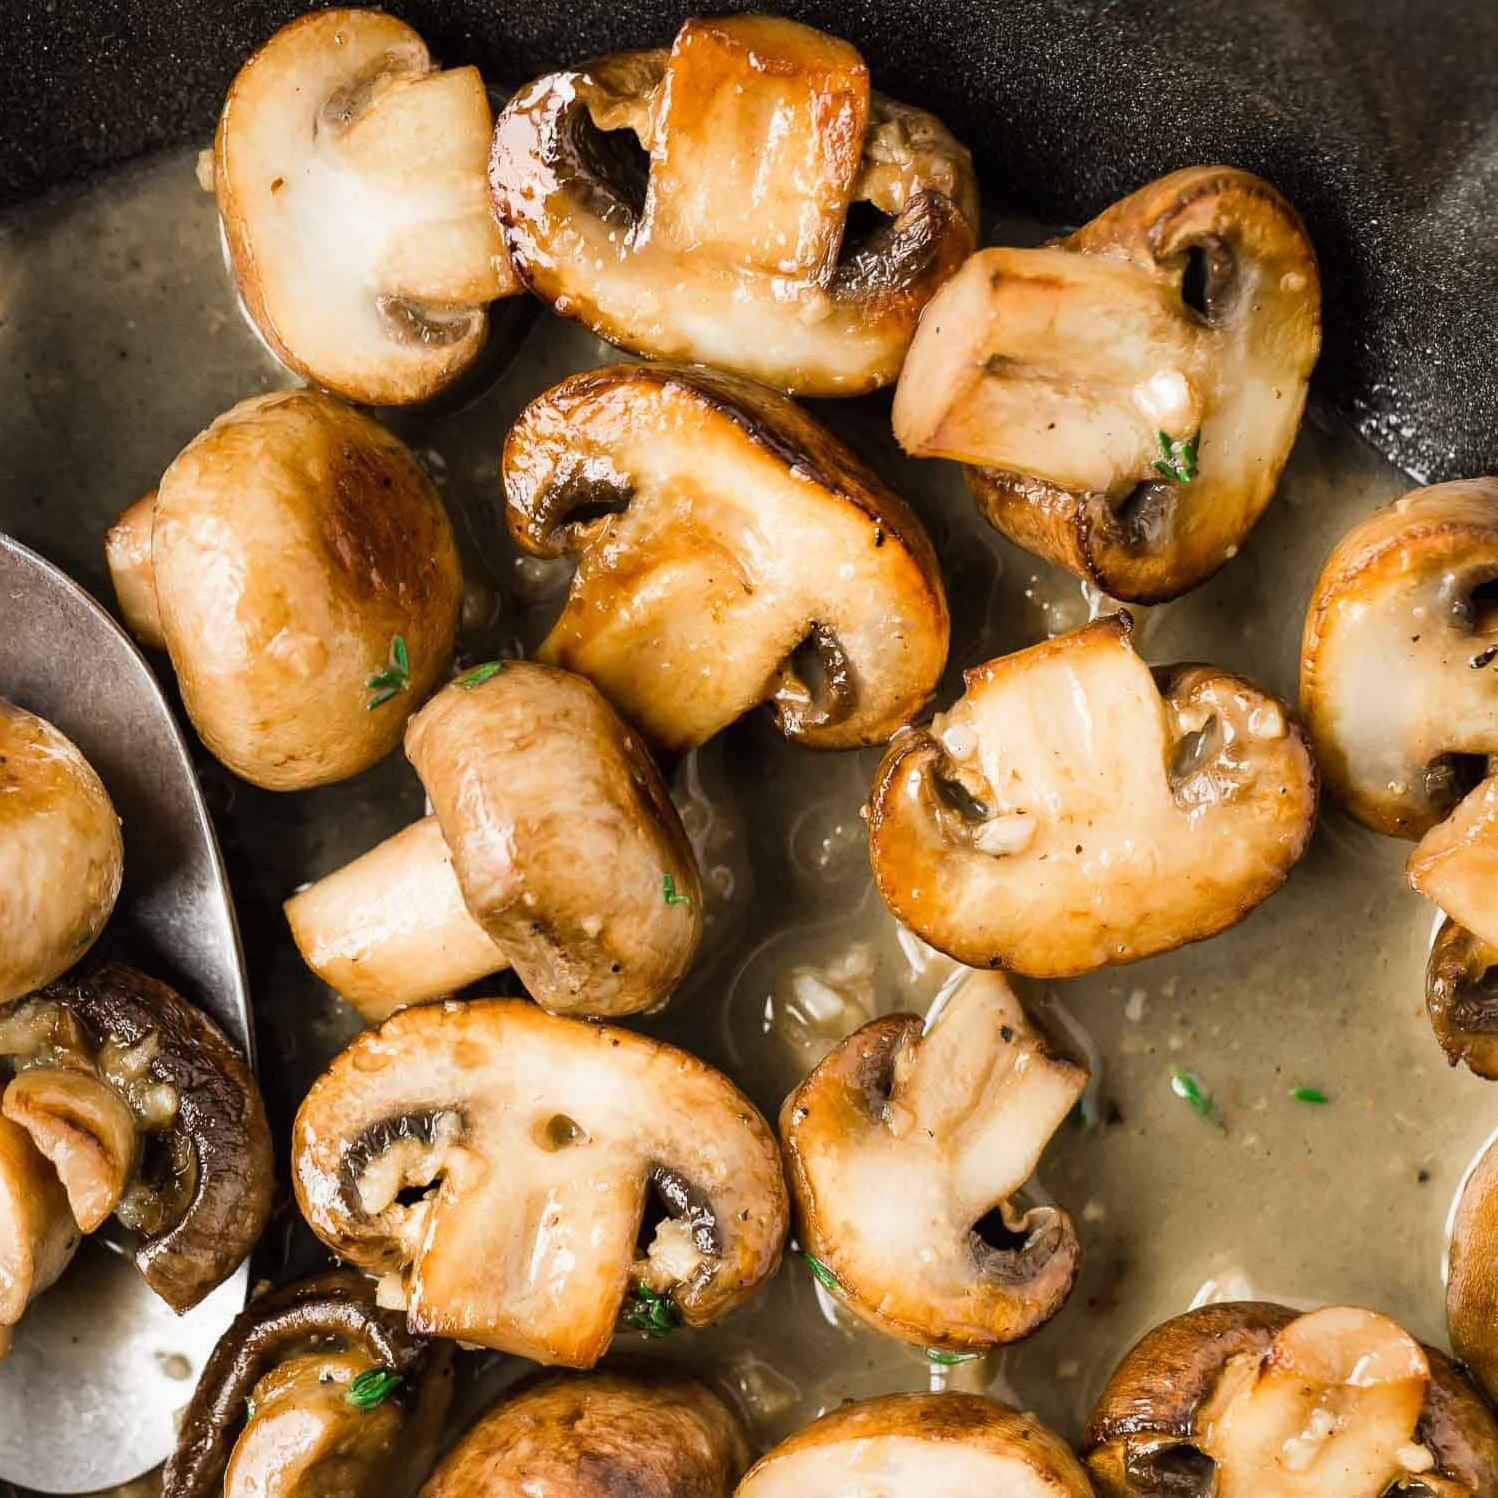  It's incredible how a simple splash of wine can elevate the flavors of mushrooms.